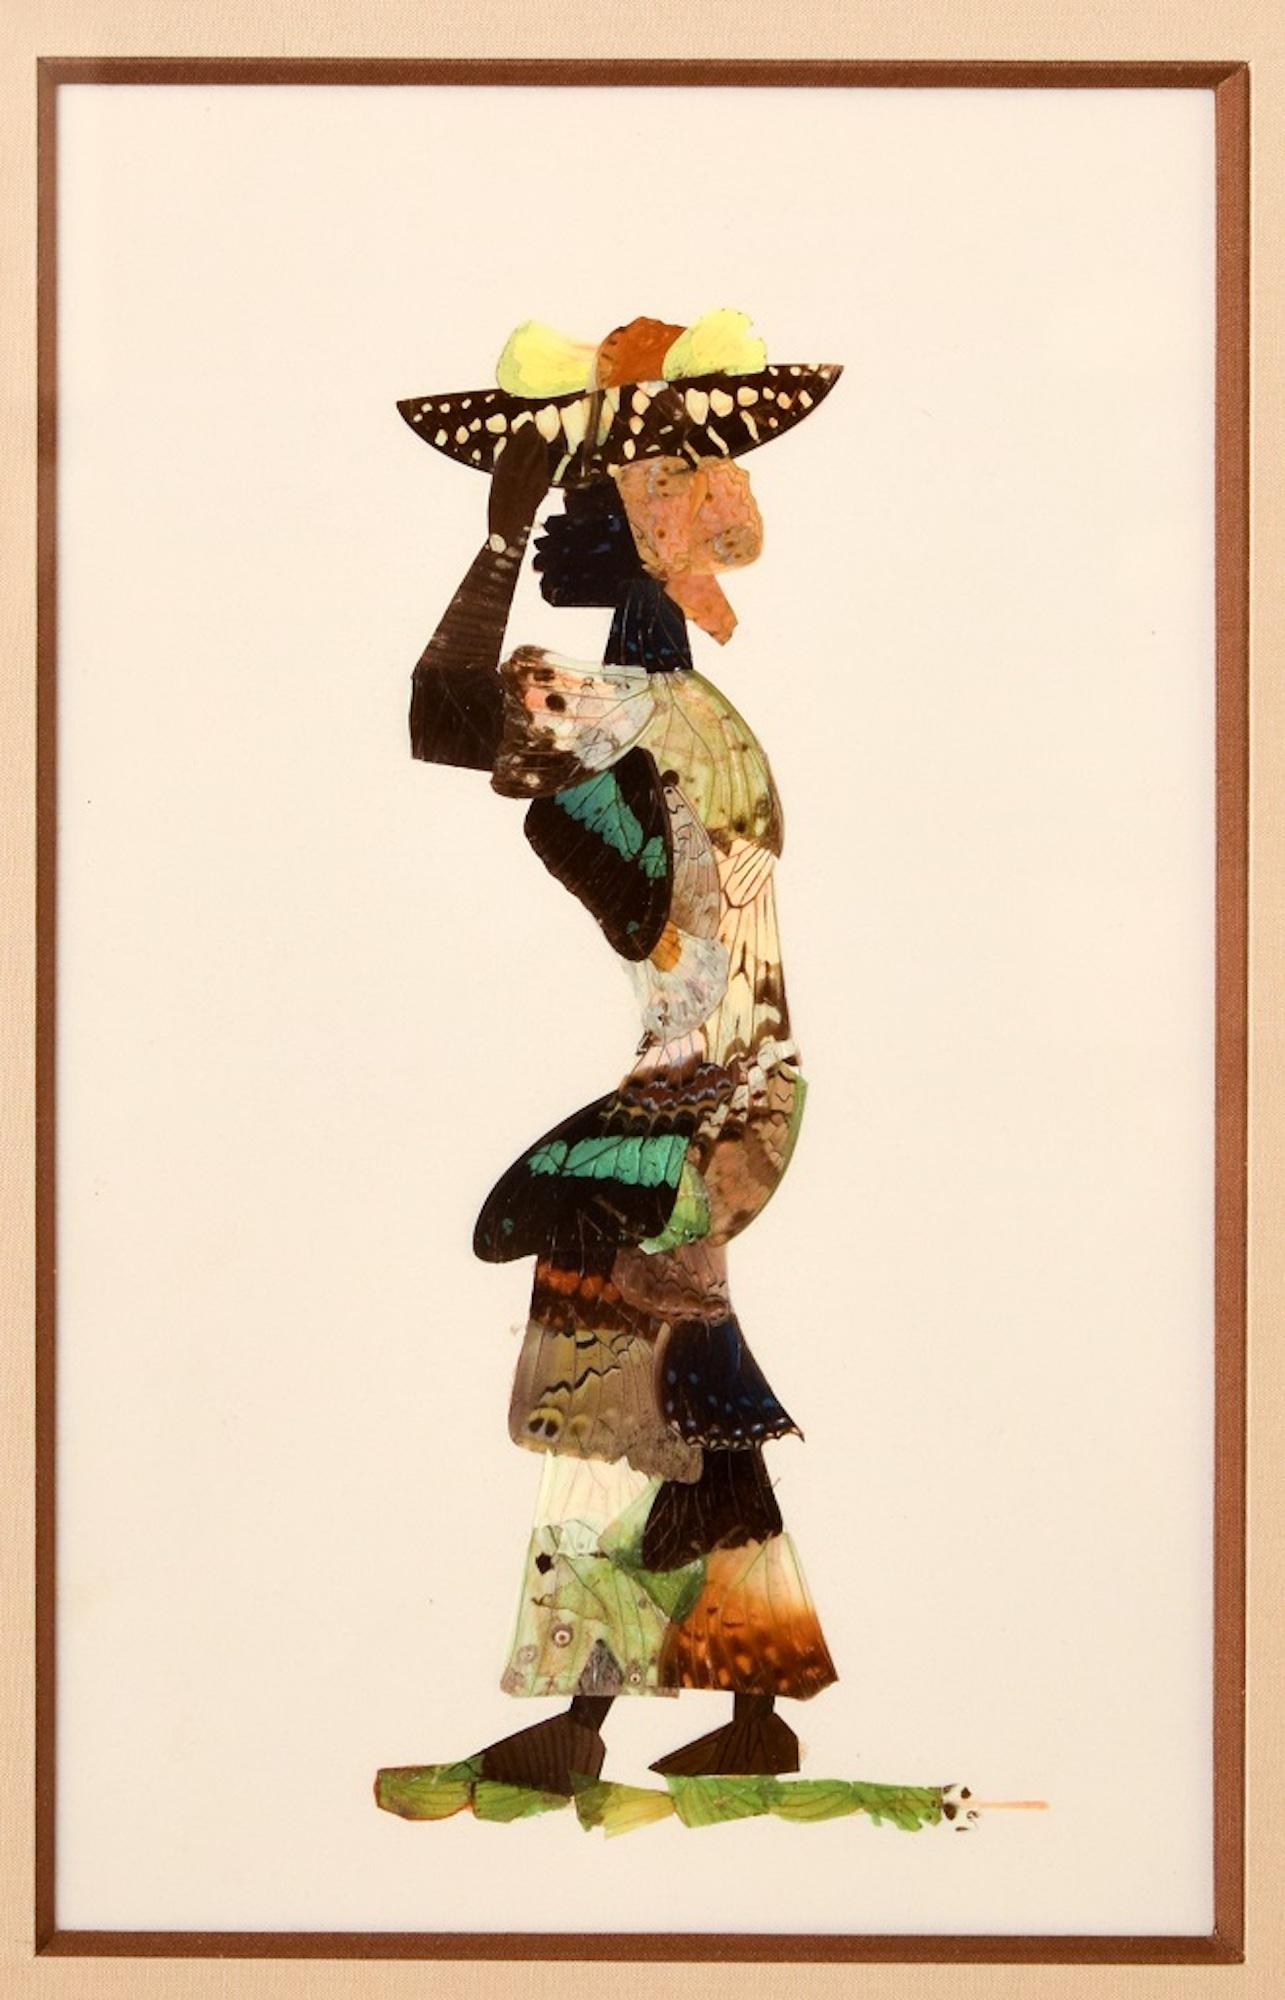 African Butterfly Woman - Vintage Collage Made with Real Butterflies - 1950s - Mixed Media Art by Unknown